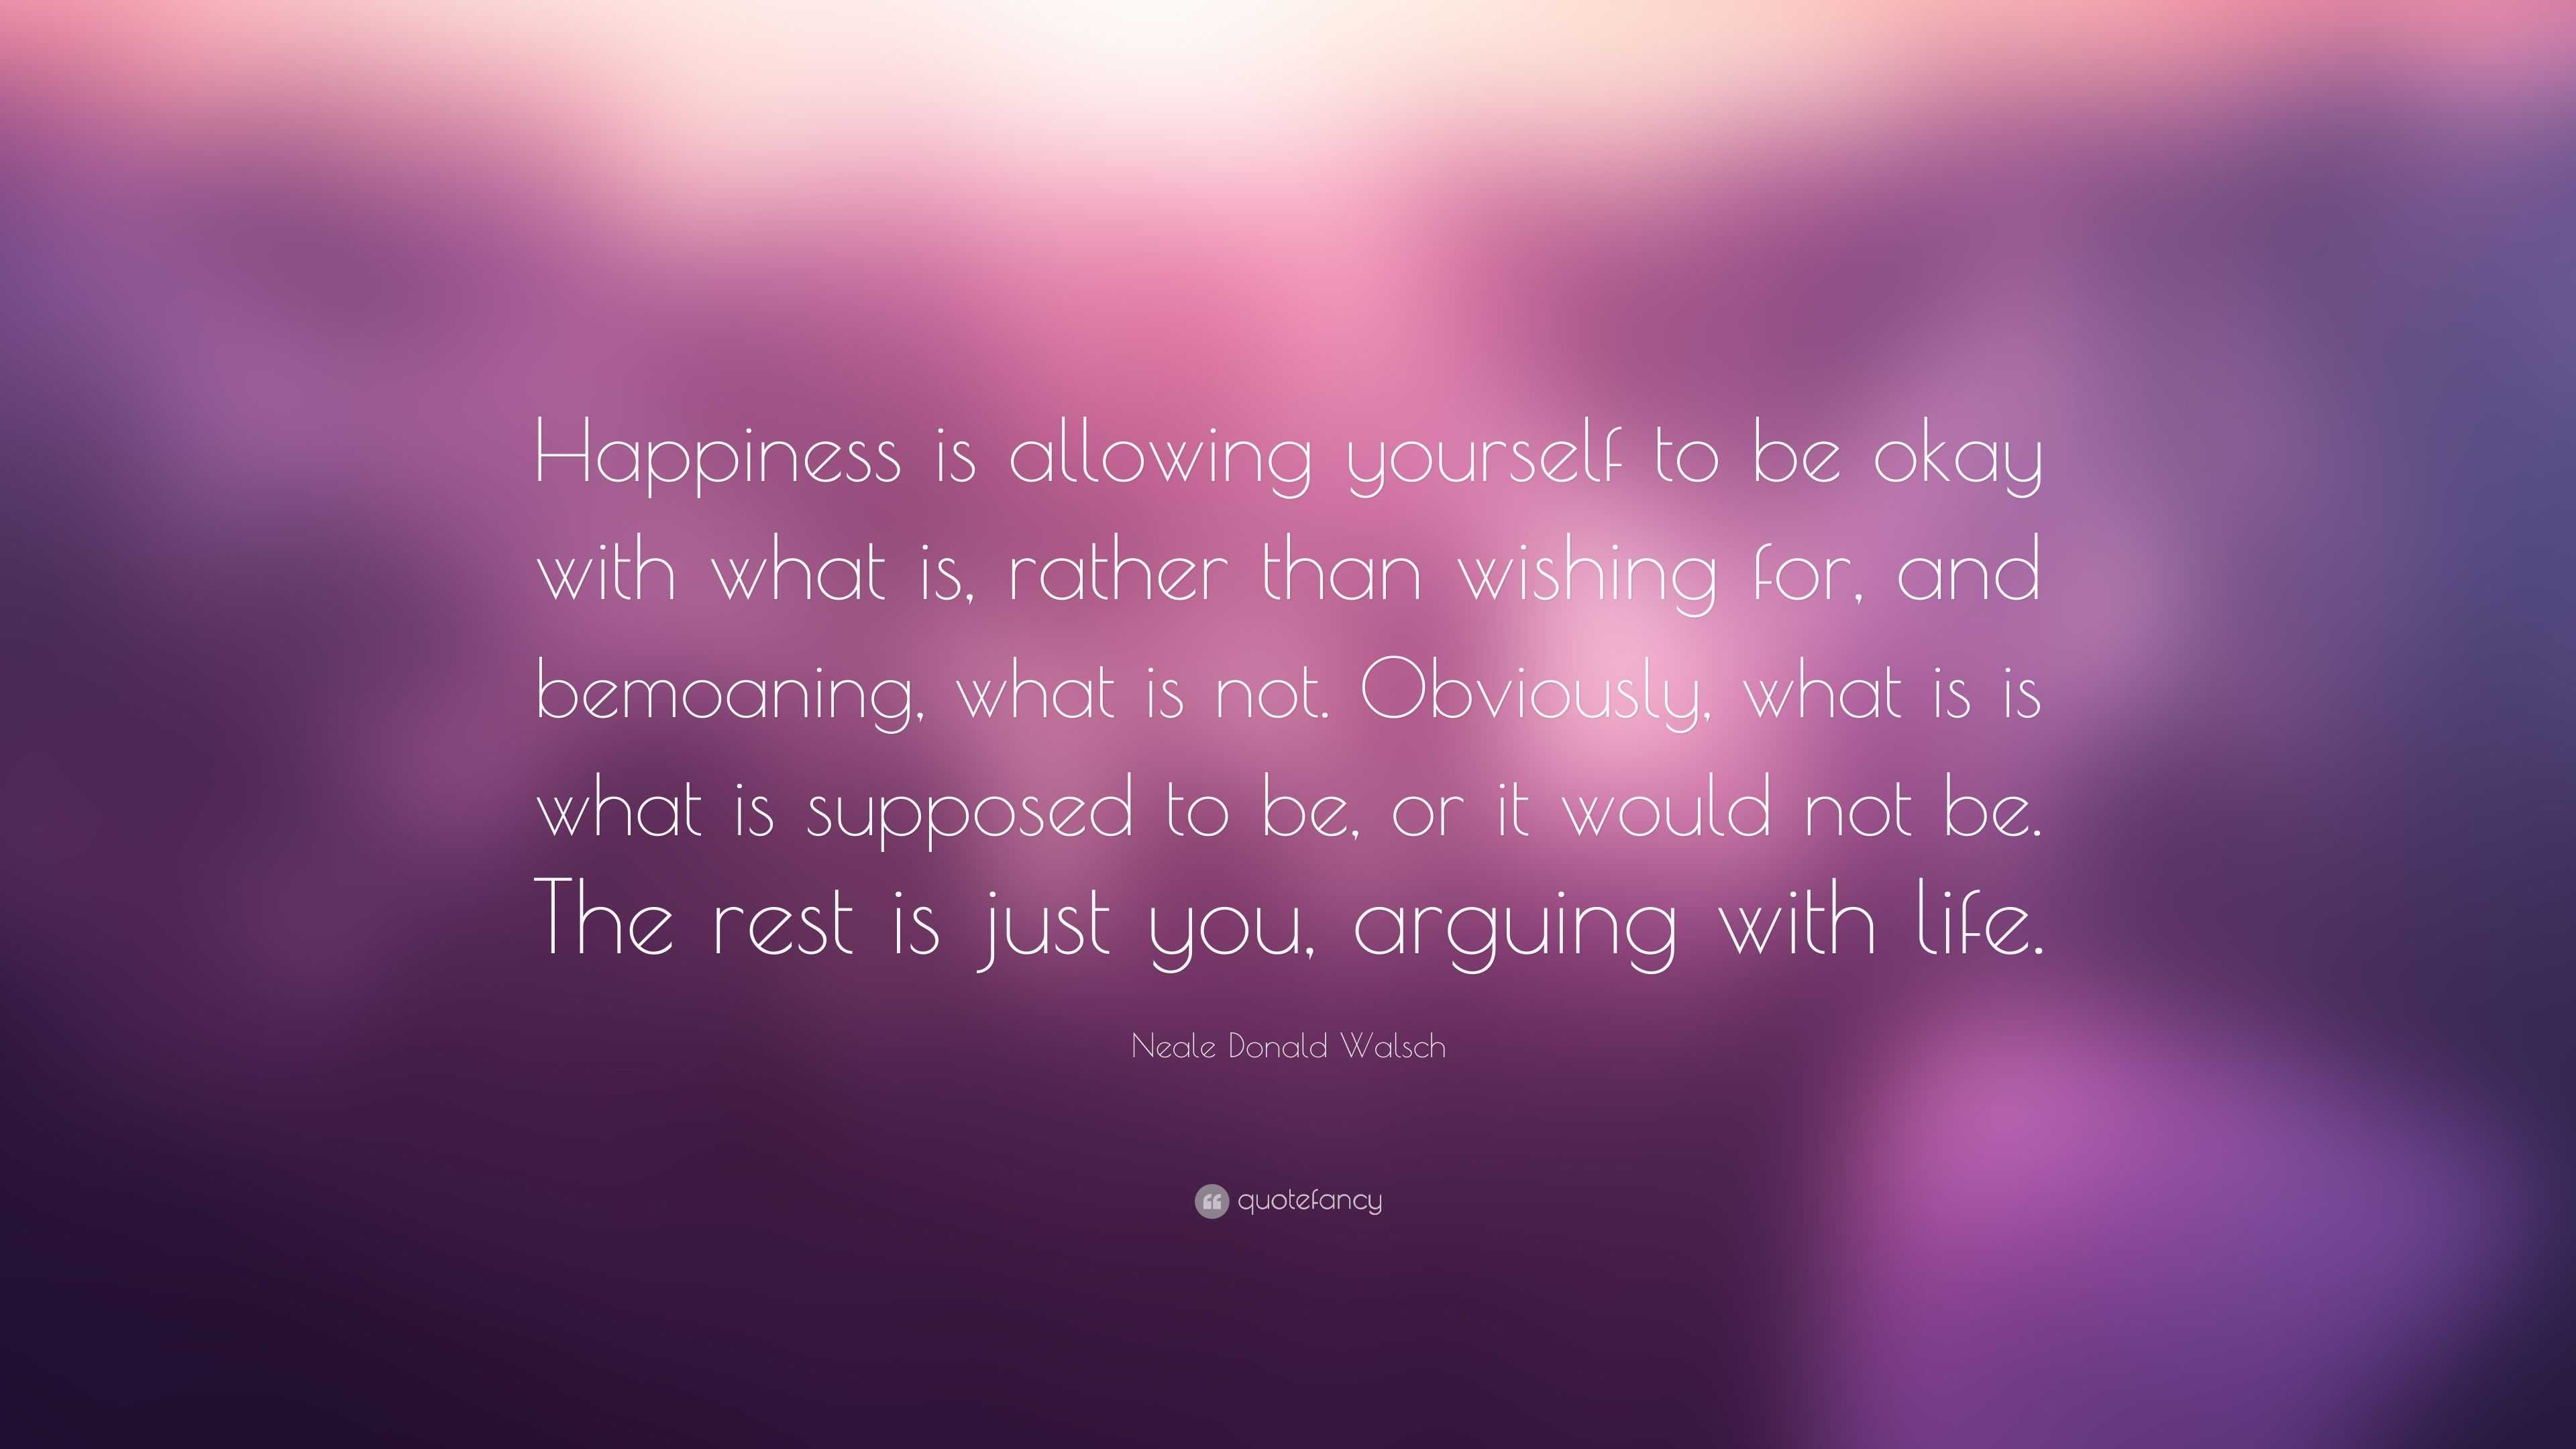 Neale Donald Walsch Quote: “Happiness is allowing yourself to be okay ...